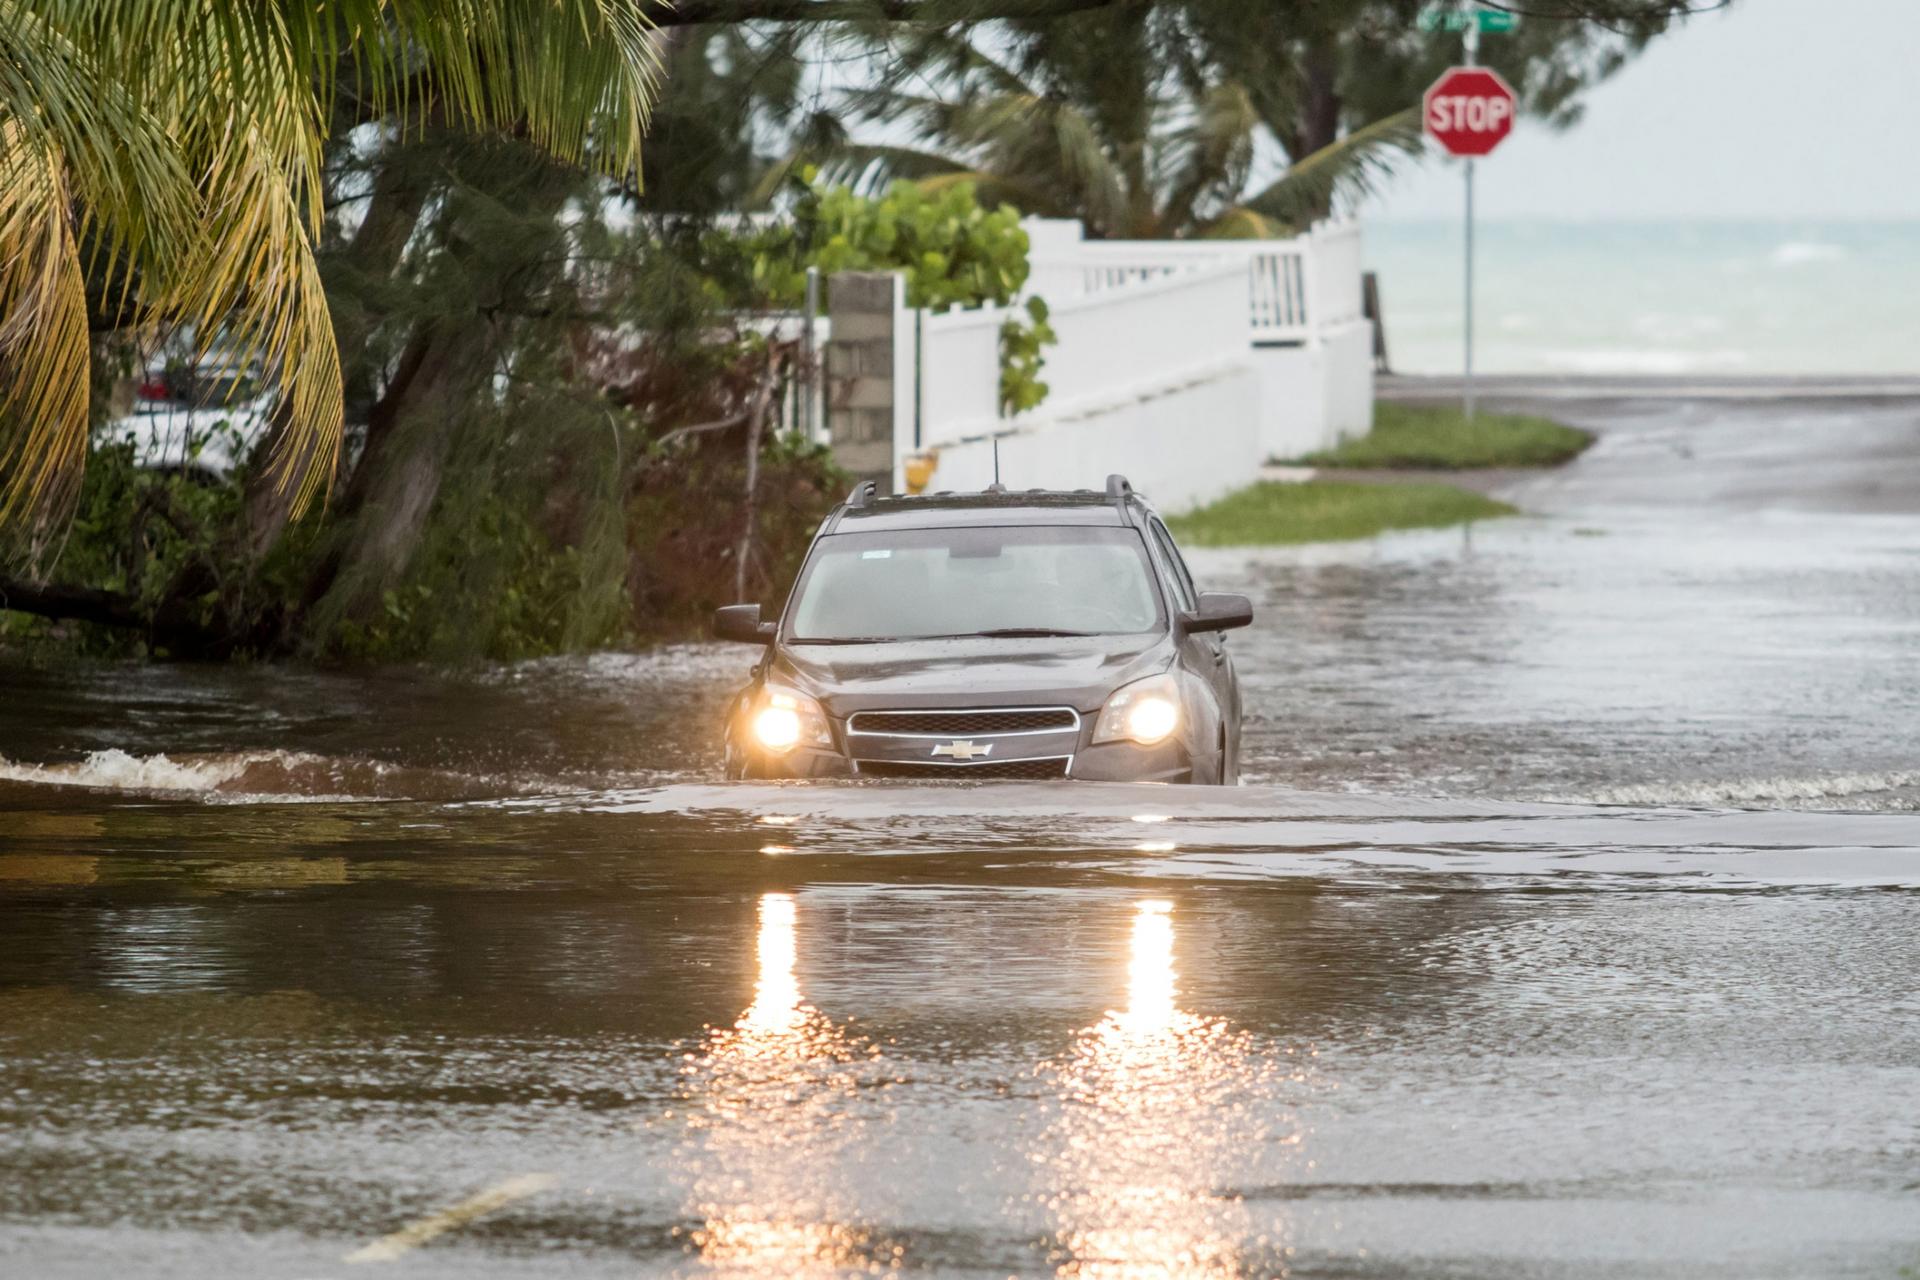 A Chevy SUV is shown driving with its lights on in a flooded street with water halfway up the tires.